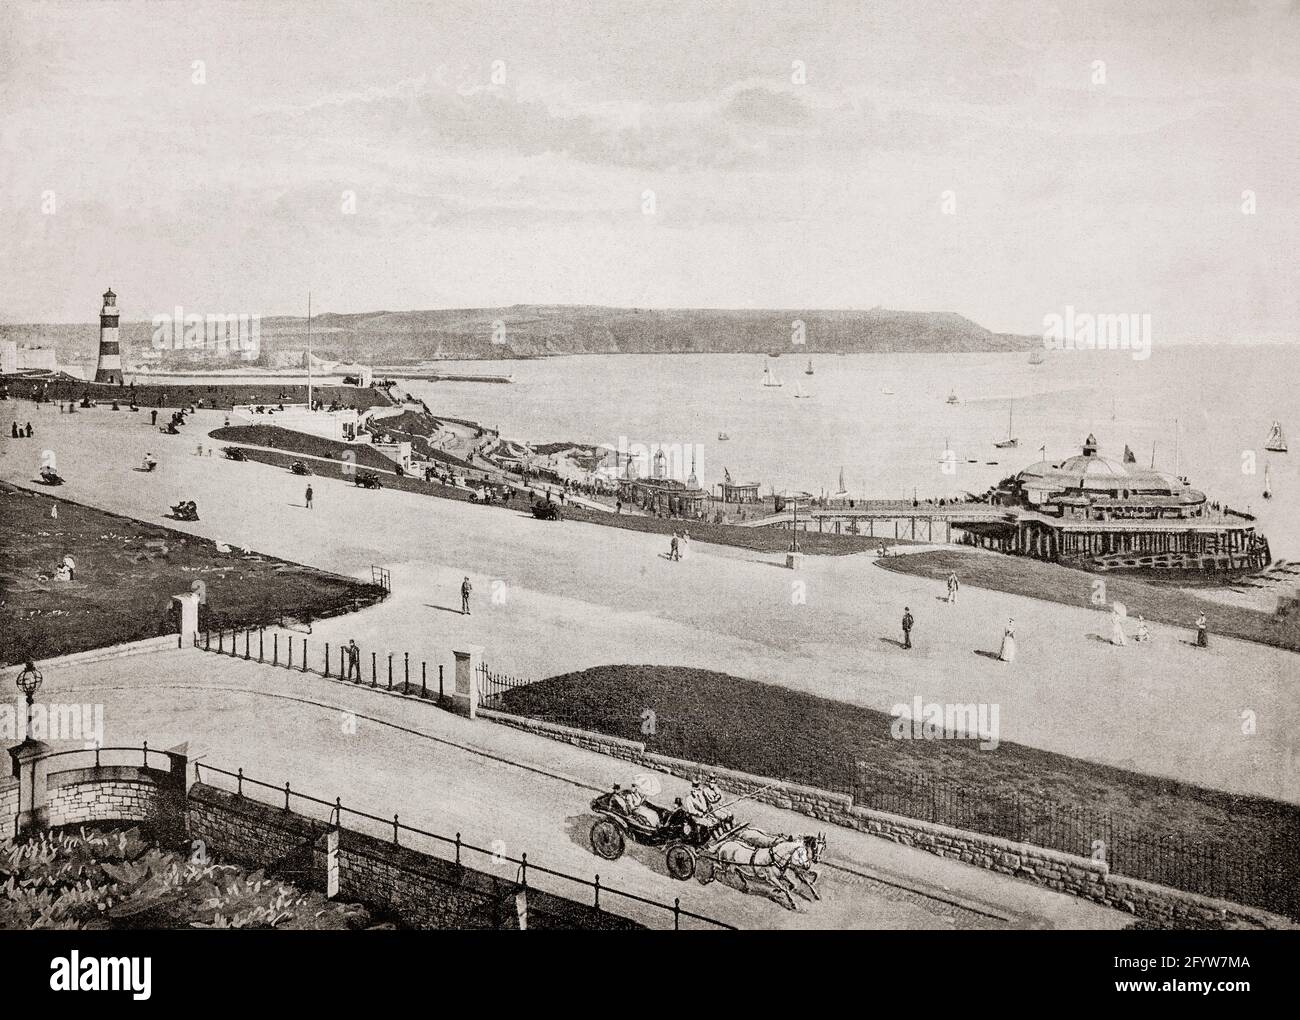 A late 19th century view of the Hoe in Plymouth, a port city in Devon on the south coast of England, where Sir Francis Drake seemingly insisted on completing his game of bowls before engaging the Spanish Armada in 1588. The grand pleasure pier, started in 1880, provided a dance hall, refreshments, promenade and a landing place for boat trips, but it was bombed in World War II. Left is John Smeaton's Eddystone Lighthouse. Originally built in 1759 on the Eddystone Rocks, 14 miles to the south, it was dismantled in 1877 and moved  to the Hoe where it was re-erected. Stock Photo